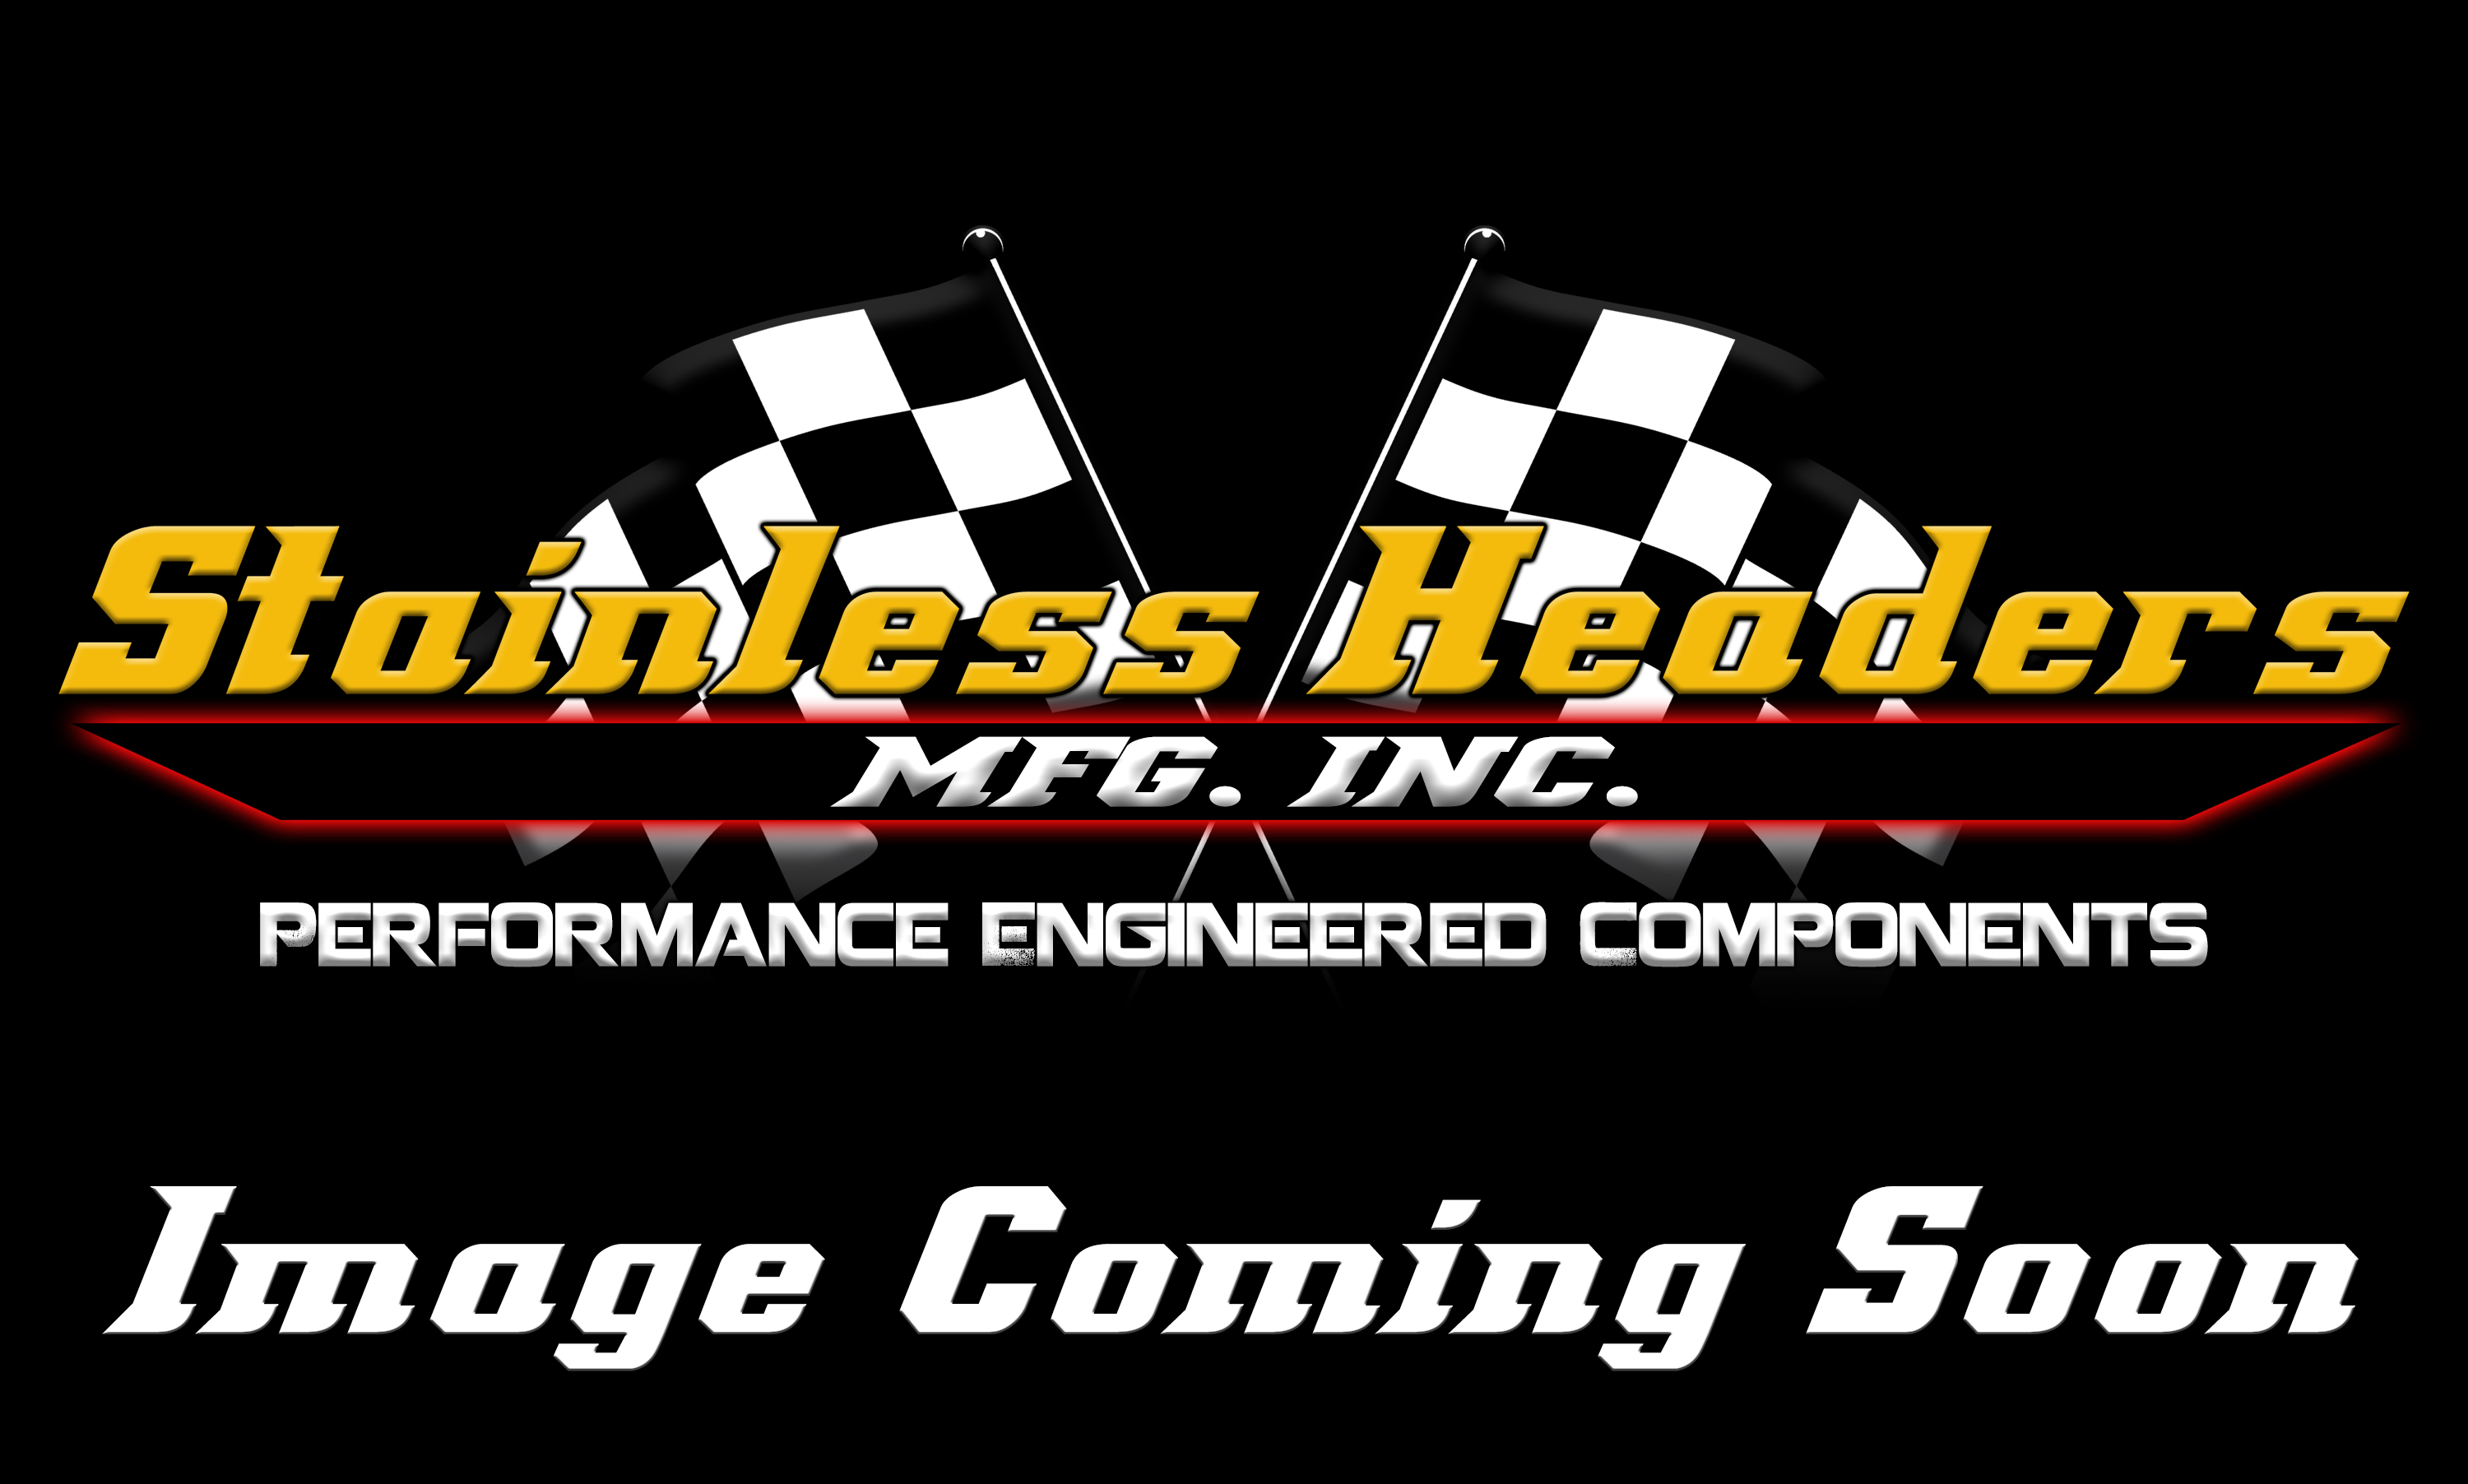 CompTurbo Technologies - CTR4202R-7290 Mid Frame Oil-Less 3.0 Turbocharger (1250 HP) - Image 3